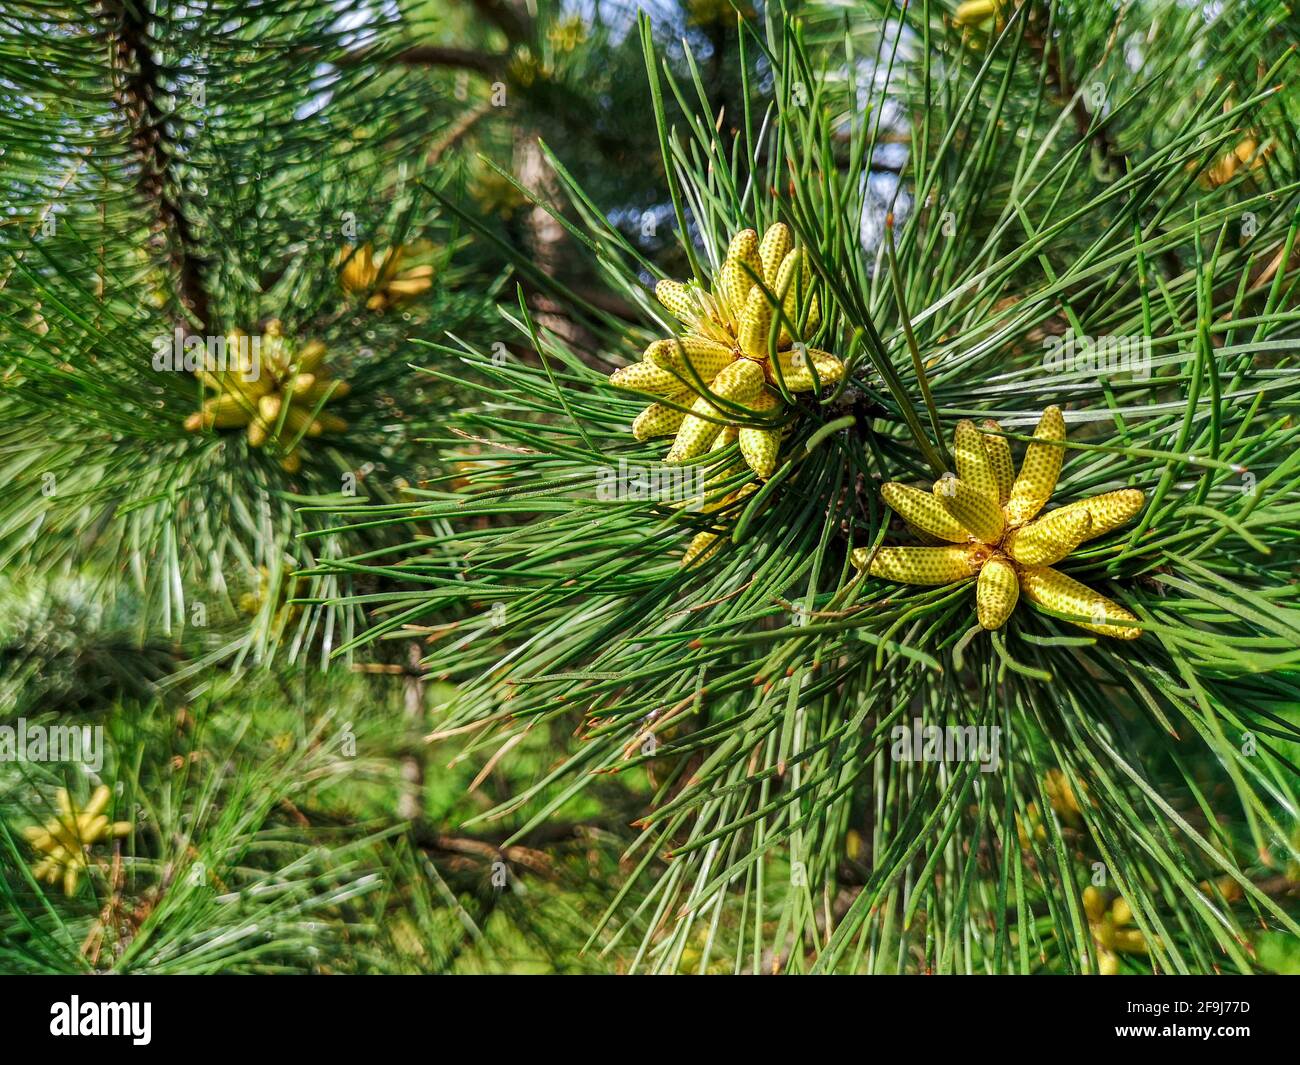 Pine tree branch with long needles and young fresh strobile cones of slime green color growing in a park in late spring early summer time. Stock Photo